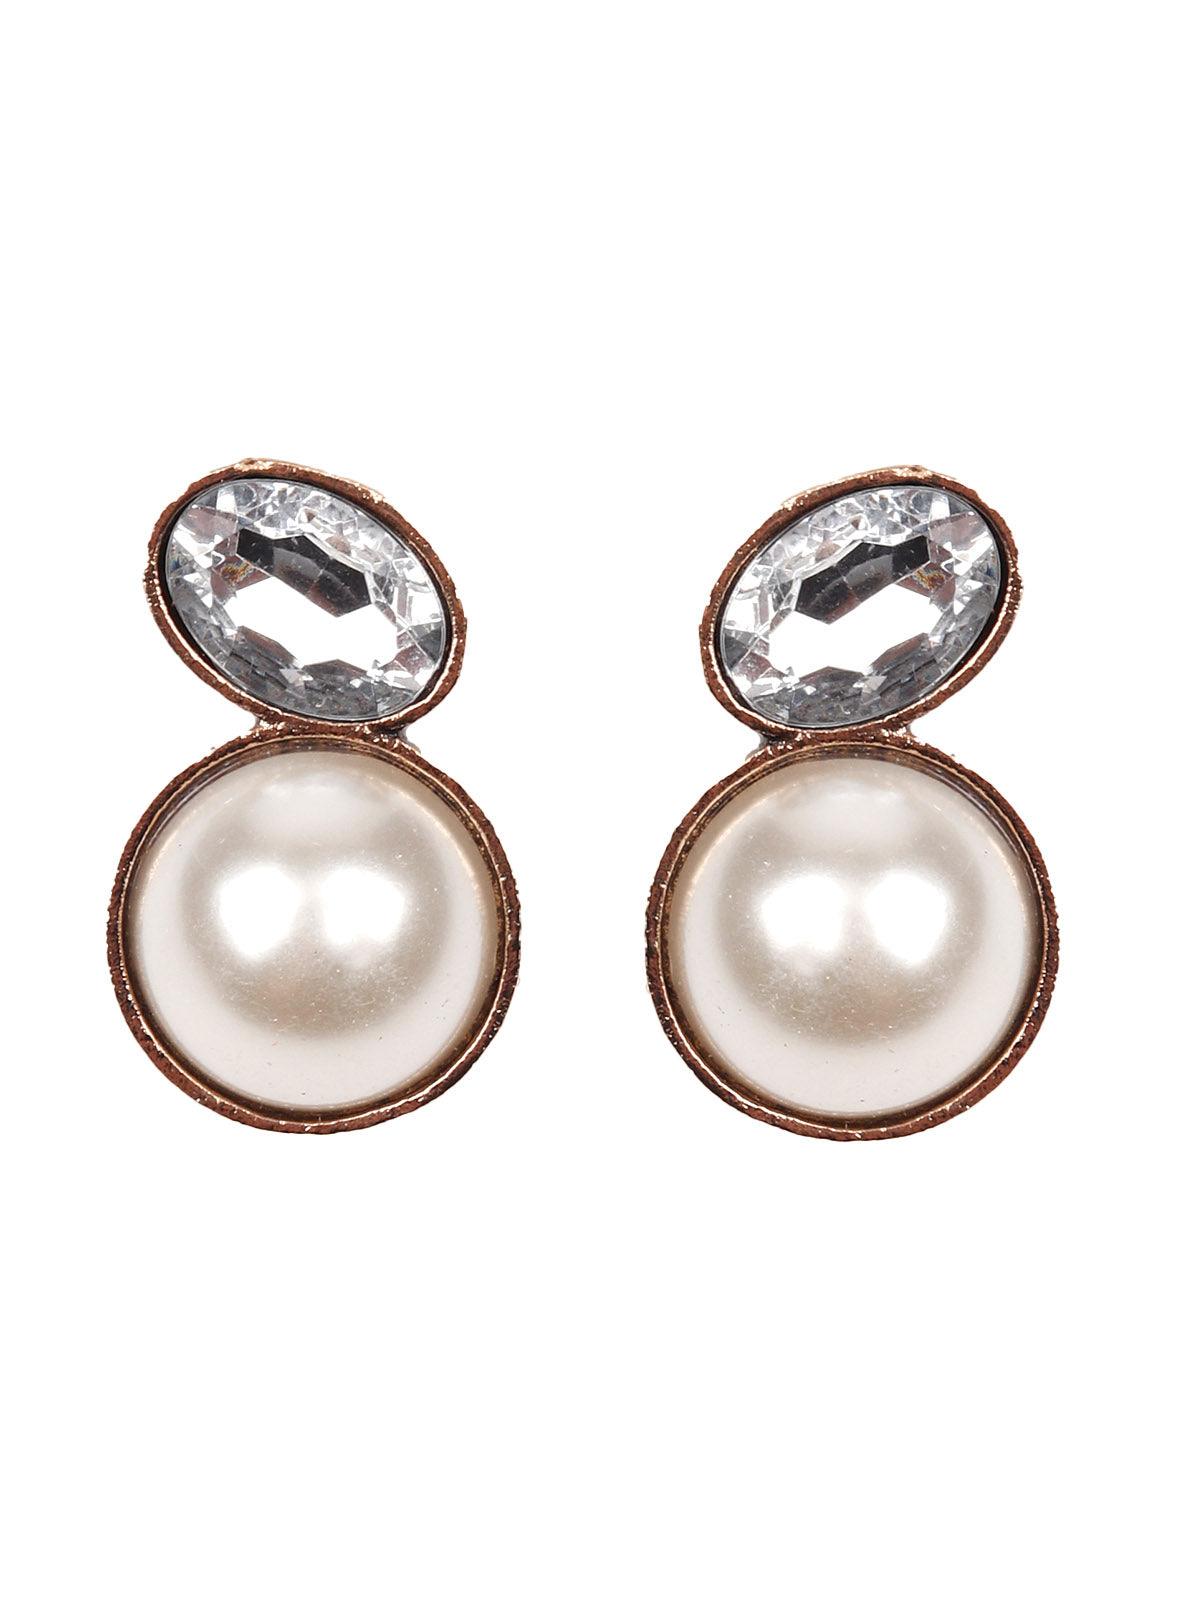 Women's Exquisite Rounded Statement Earrings - Odette